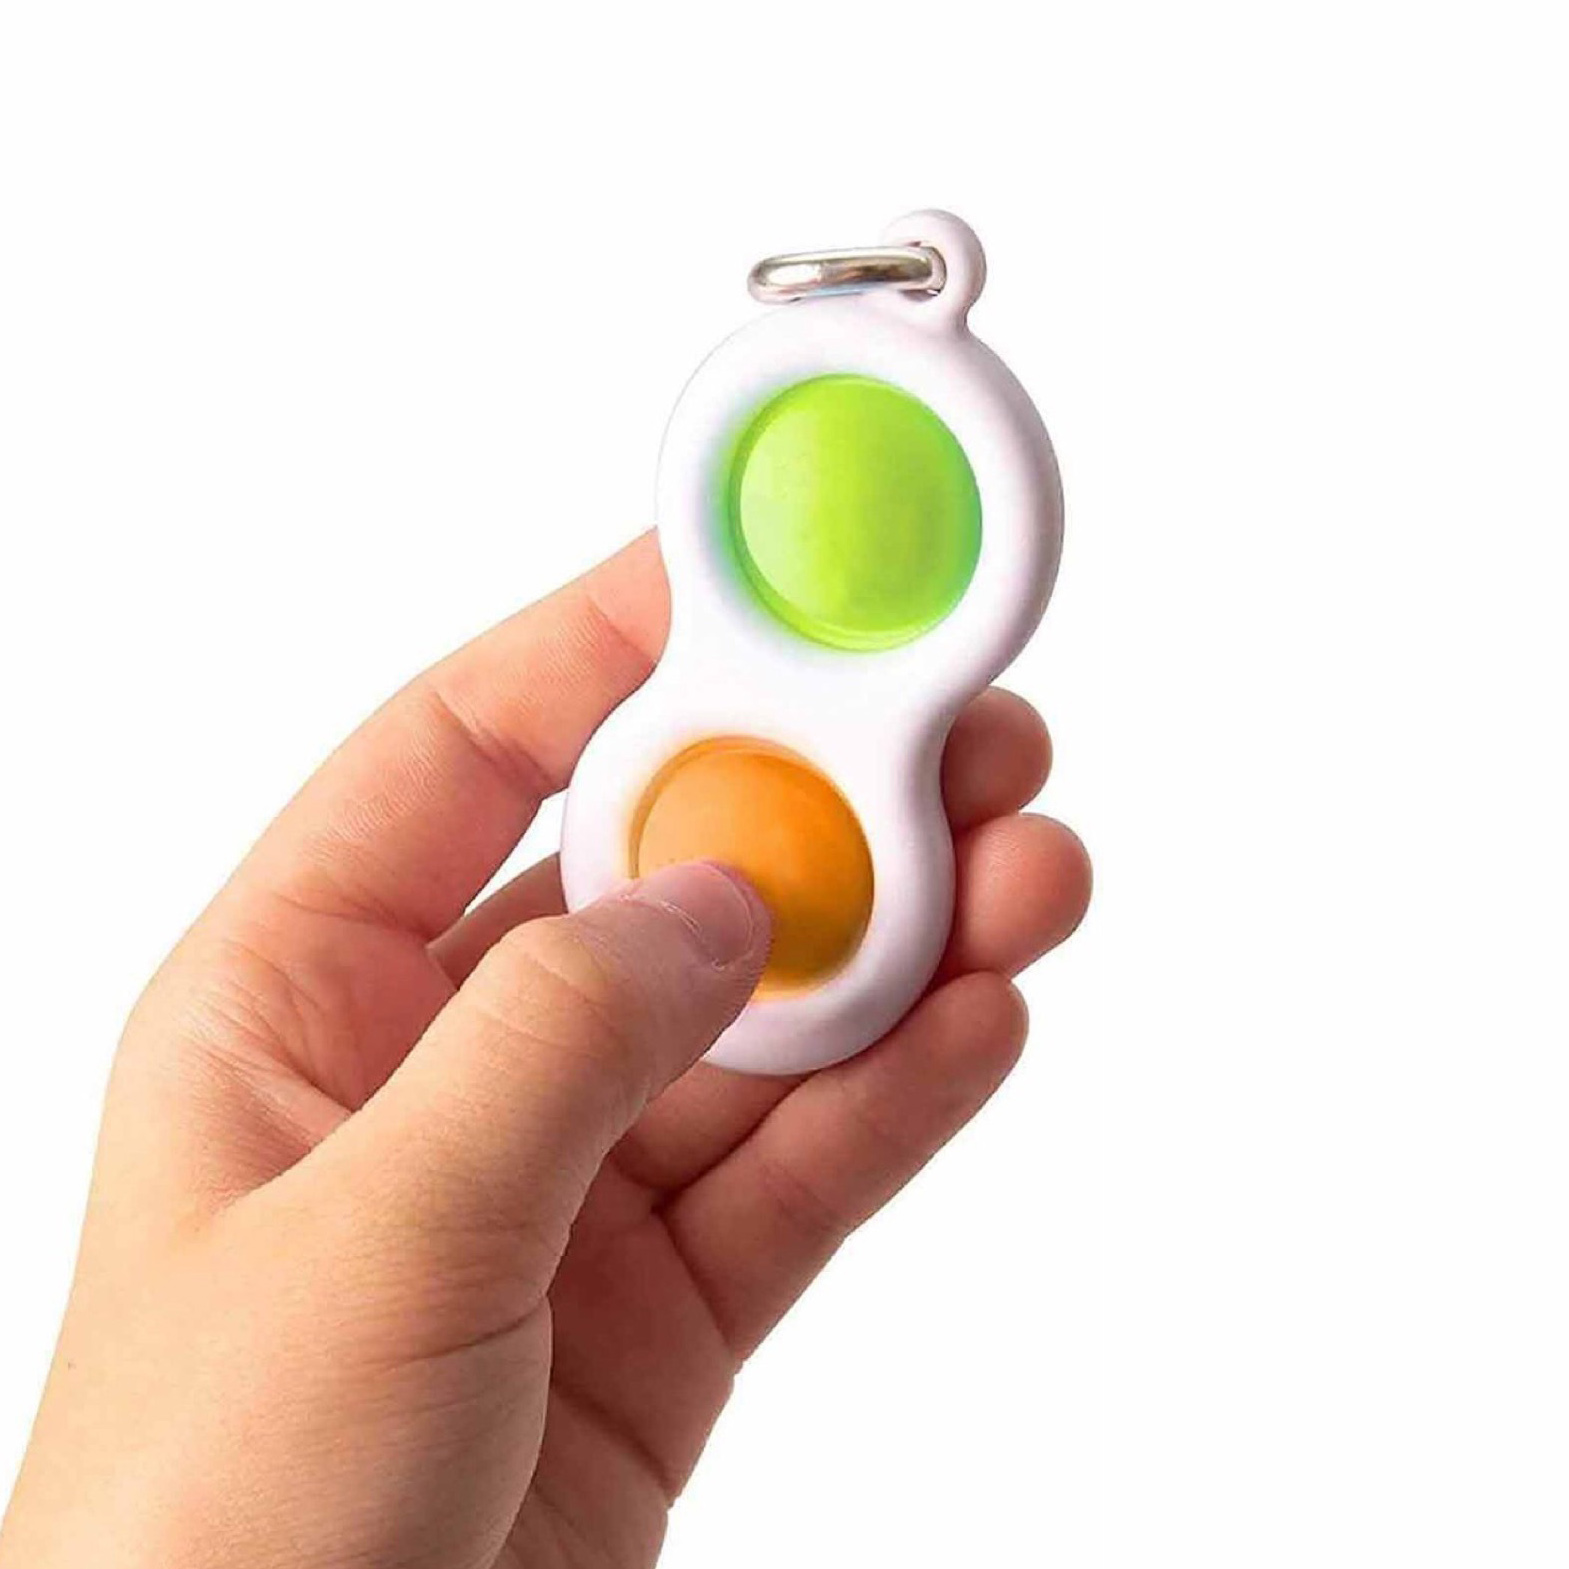 Find Mini Simple Dimple Sensory Mini Sensory Fidget Relaxation Stress Relief Anti Anxiety Autism Hand EDC Gadget for Kids Teen Adult Push Pop Bubble Keychain for Sale on Gipsybee.com with cryptocurrencies